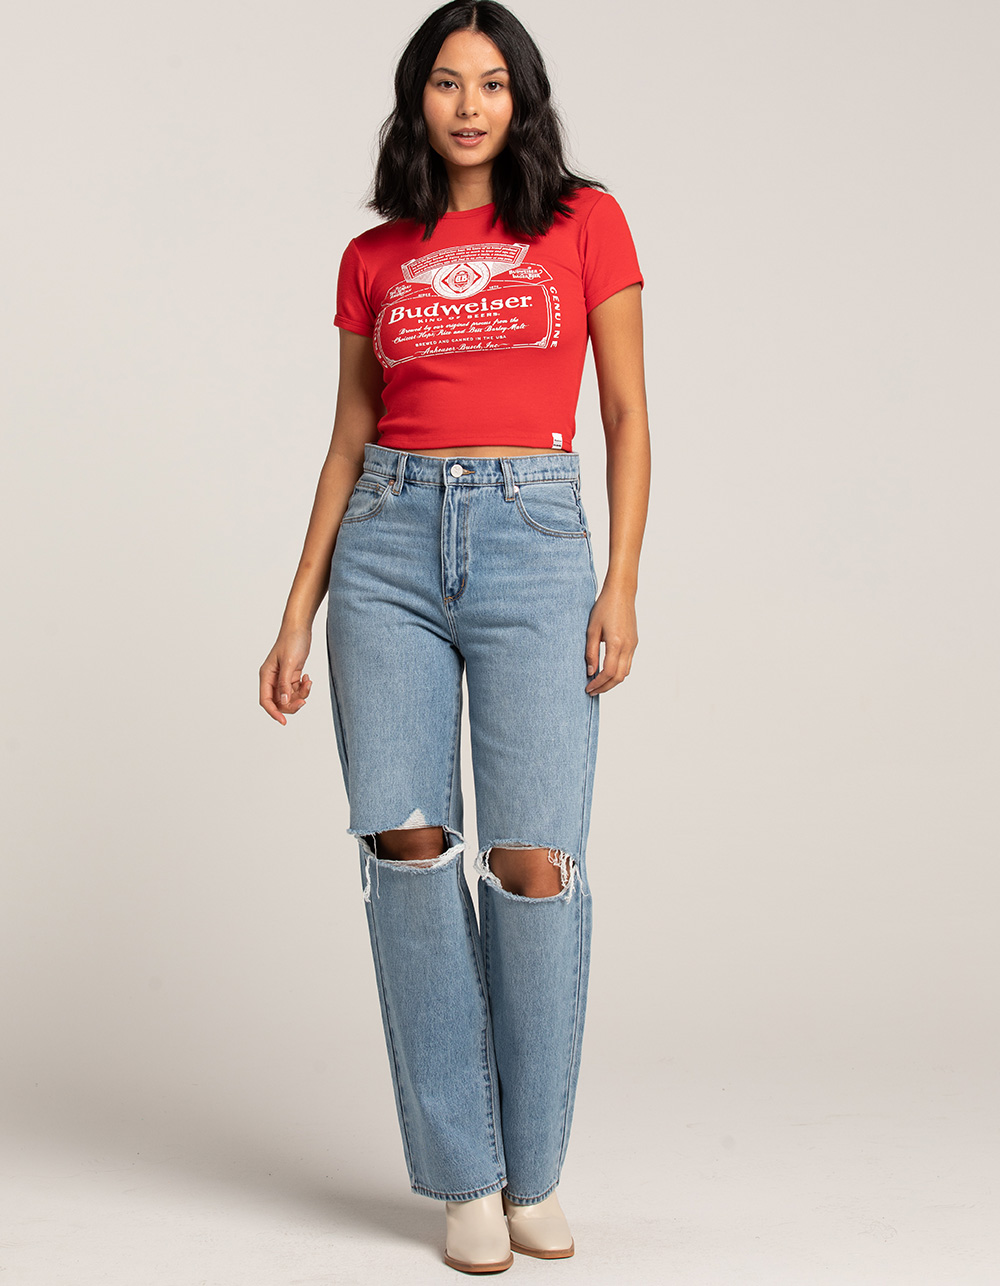 RSQ Budweiser Womens Baby Tee - RED | Tillys